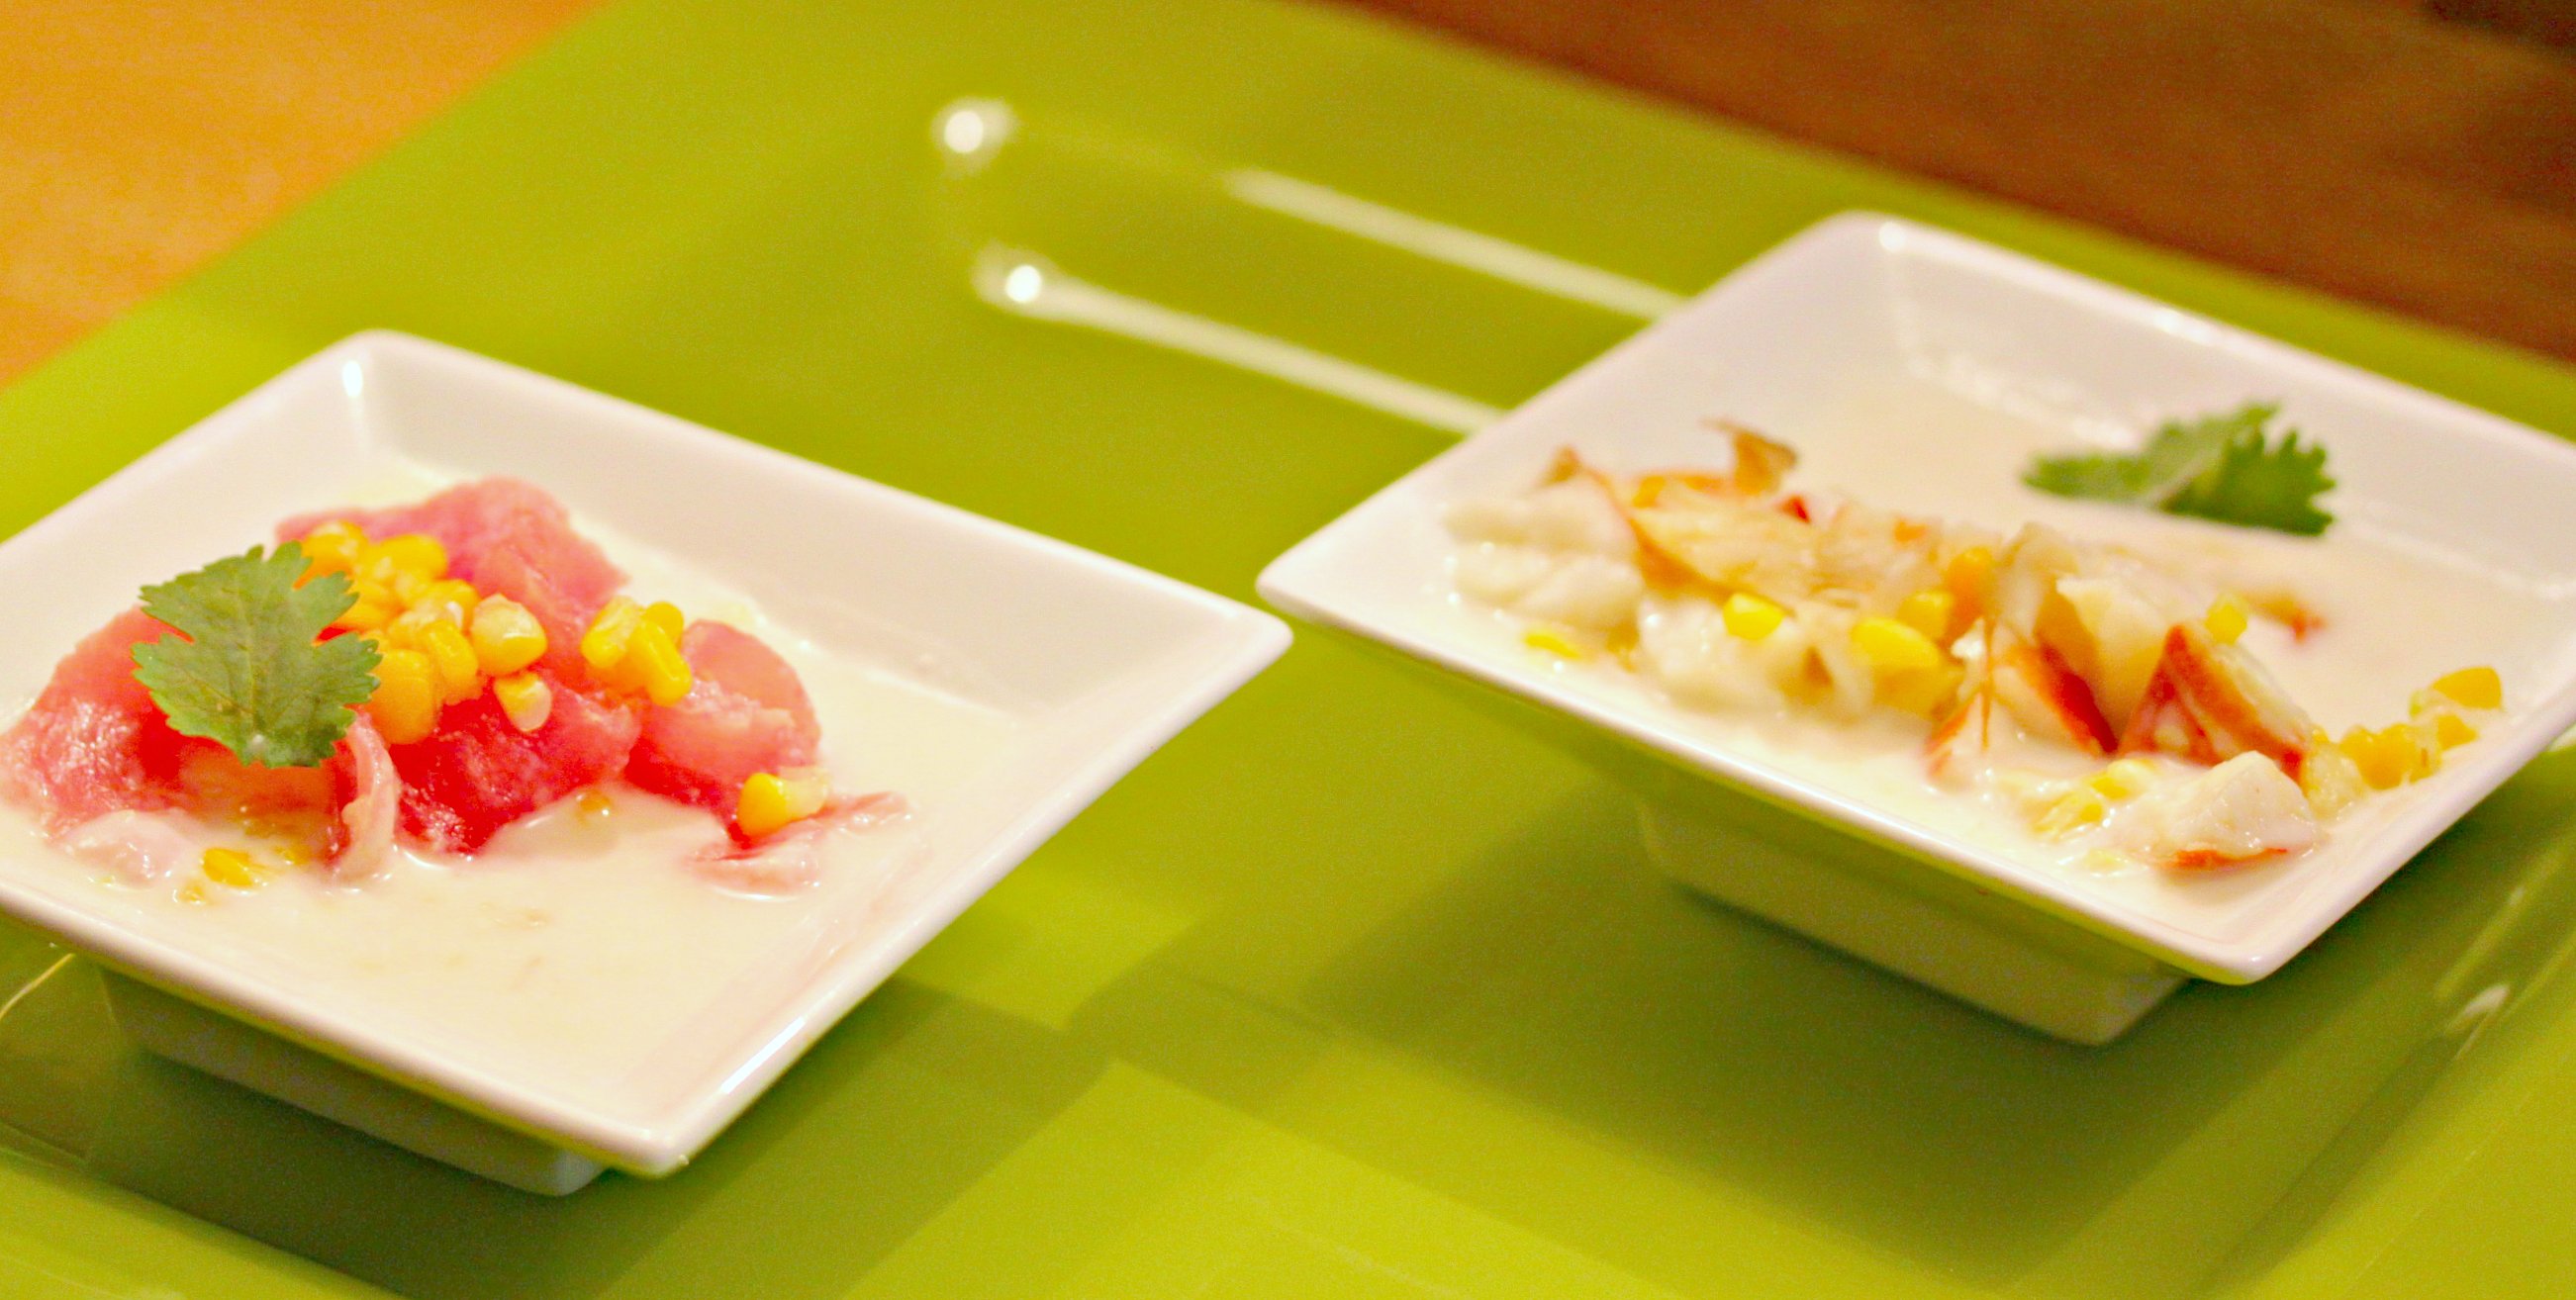 two square dishes with fruit and garnishments on them